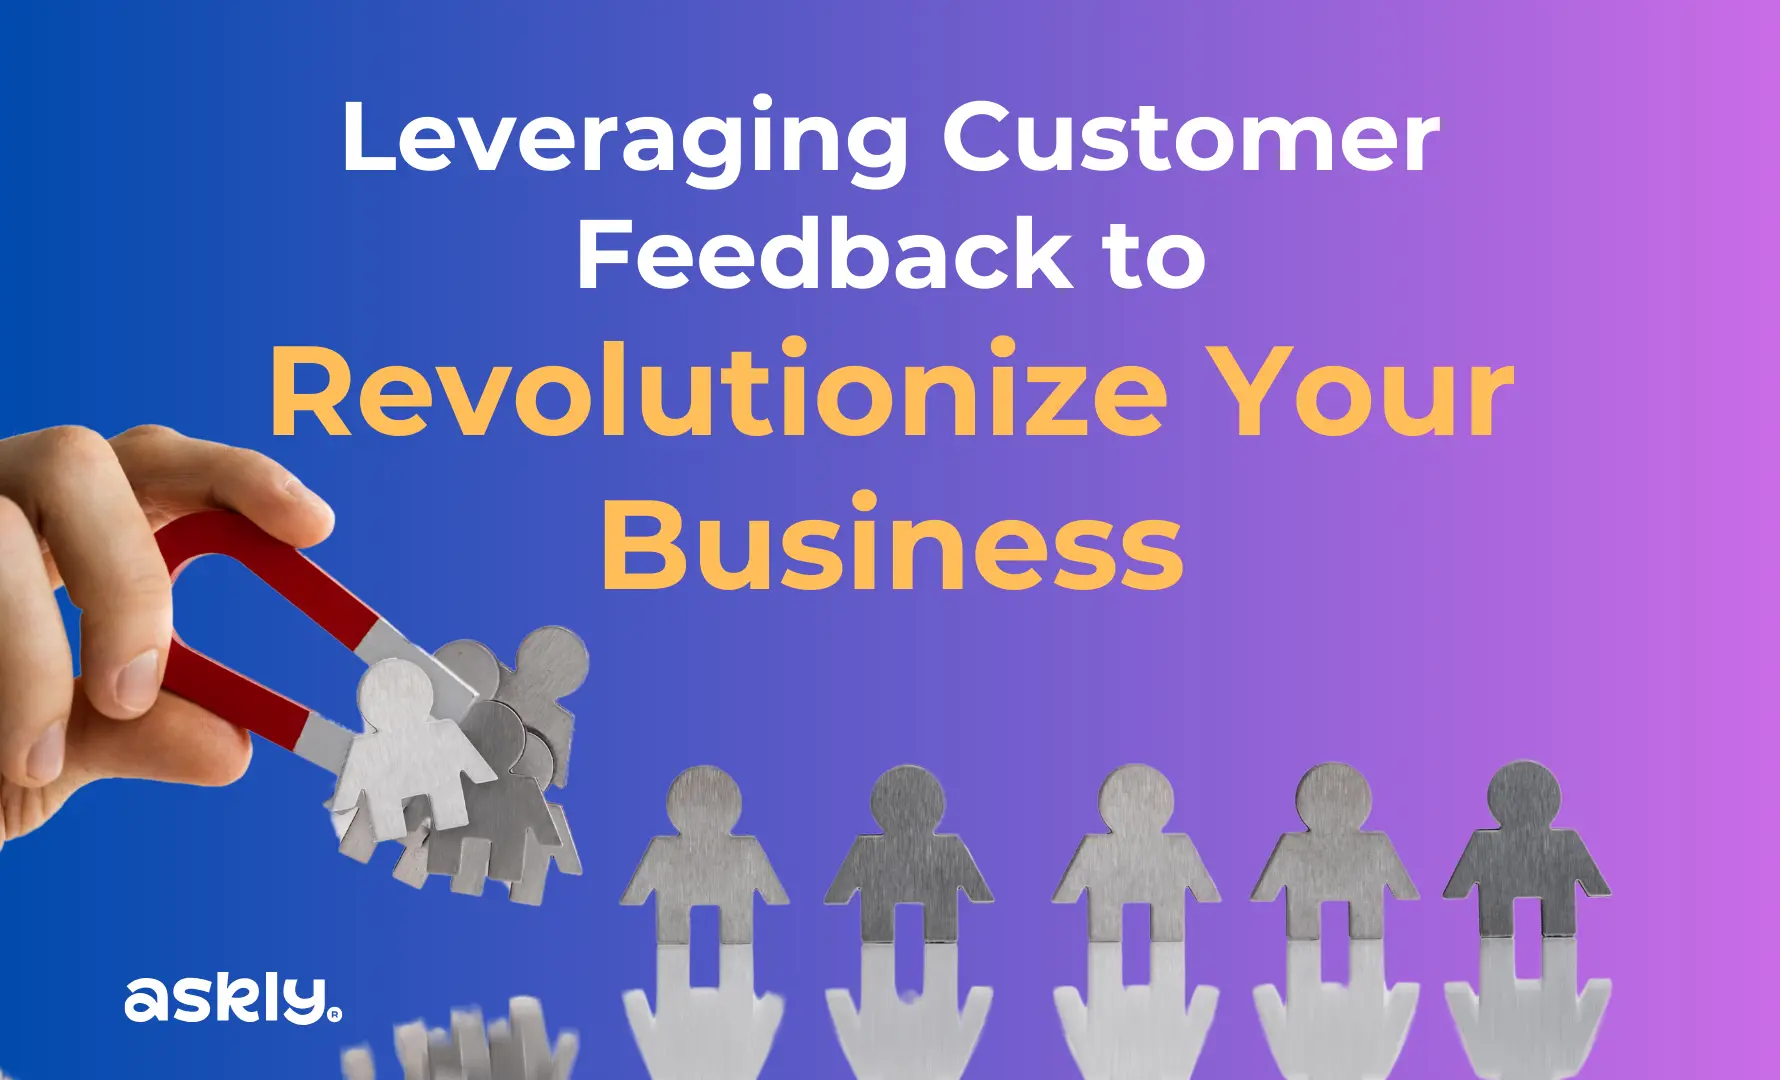 Leveraging Customer Feedback to Revolutionize Your Business